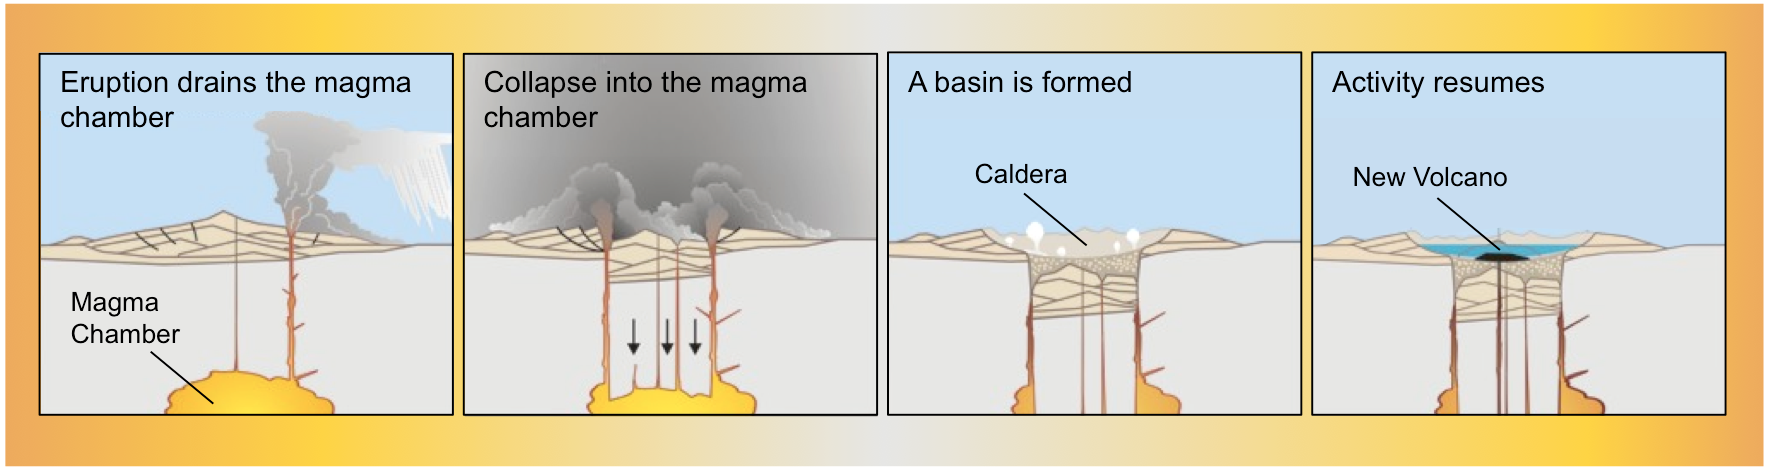 Formation of a caldera. Calderas are the result of a volcano collapsing into a drained magma chamber. Source: Karla Panchuk CC BY 4.0. Modified after U. S. Geological Survey (2002)